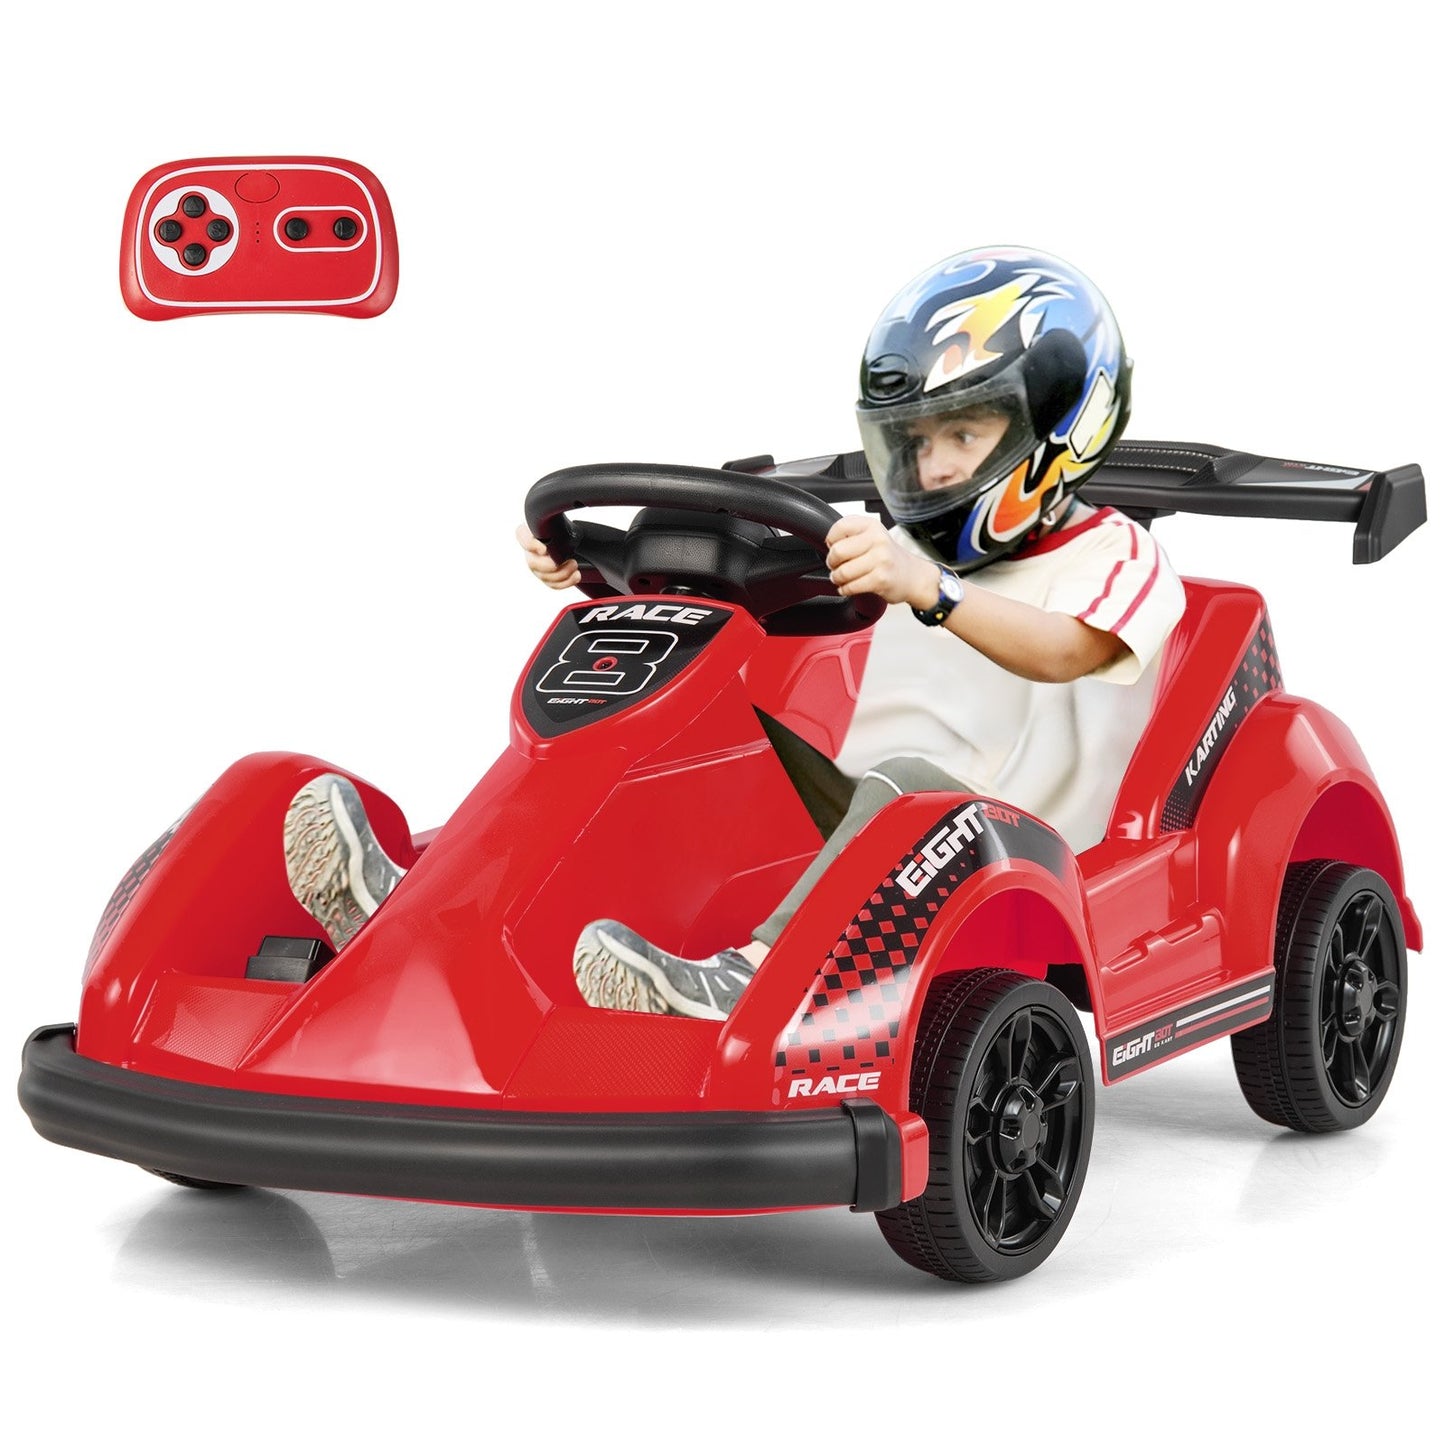 6V Kids Ride On Go Cart with Remote Control and Safety Belt, Red